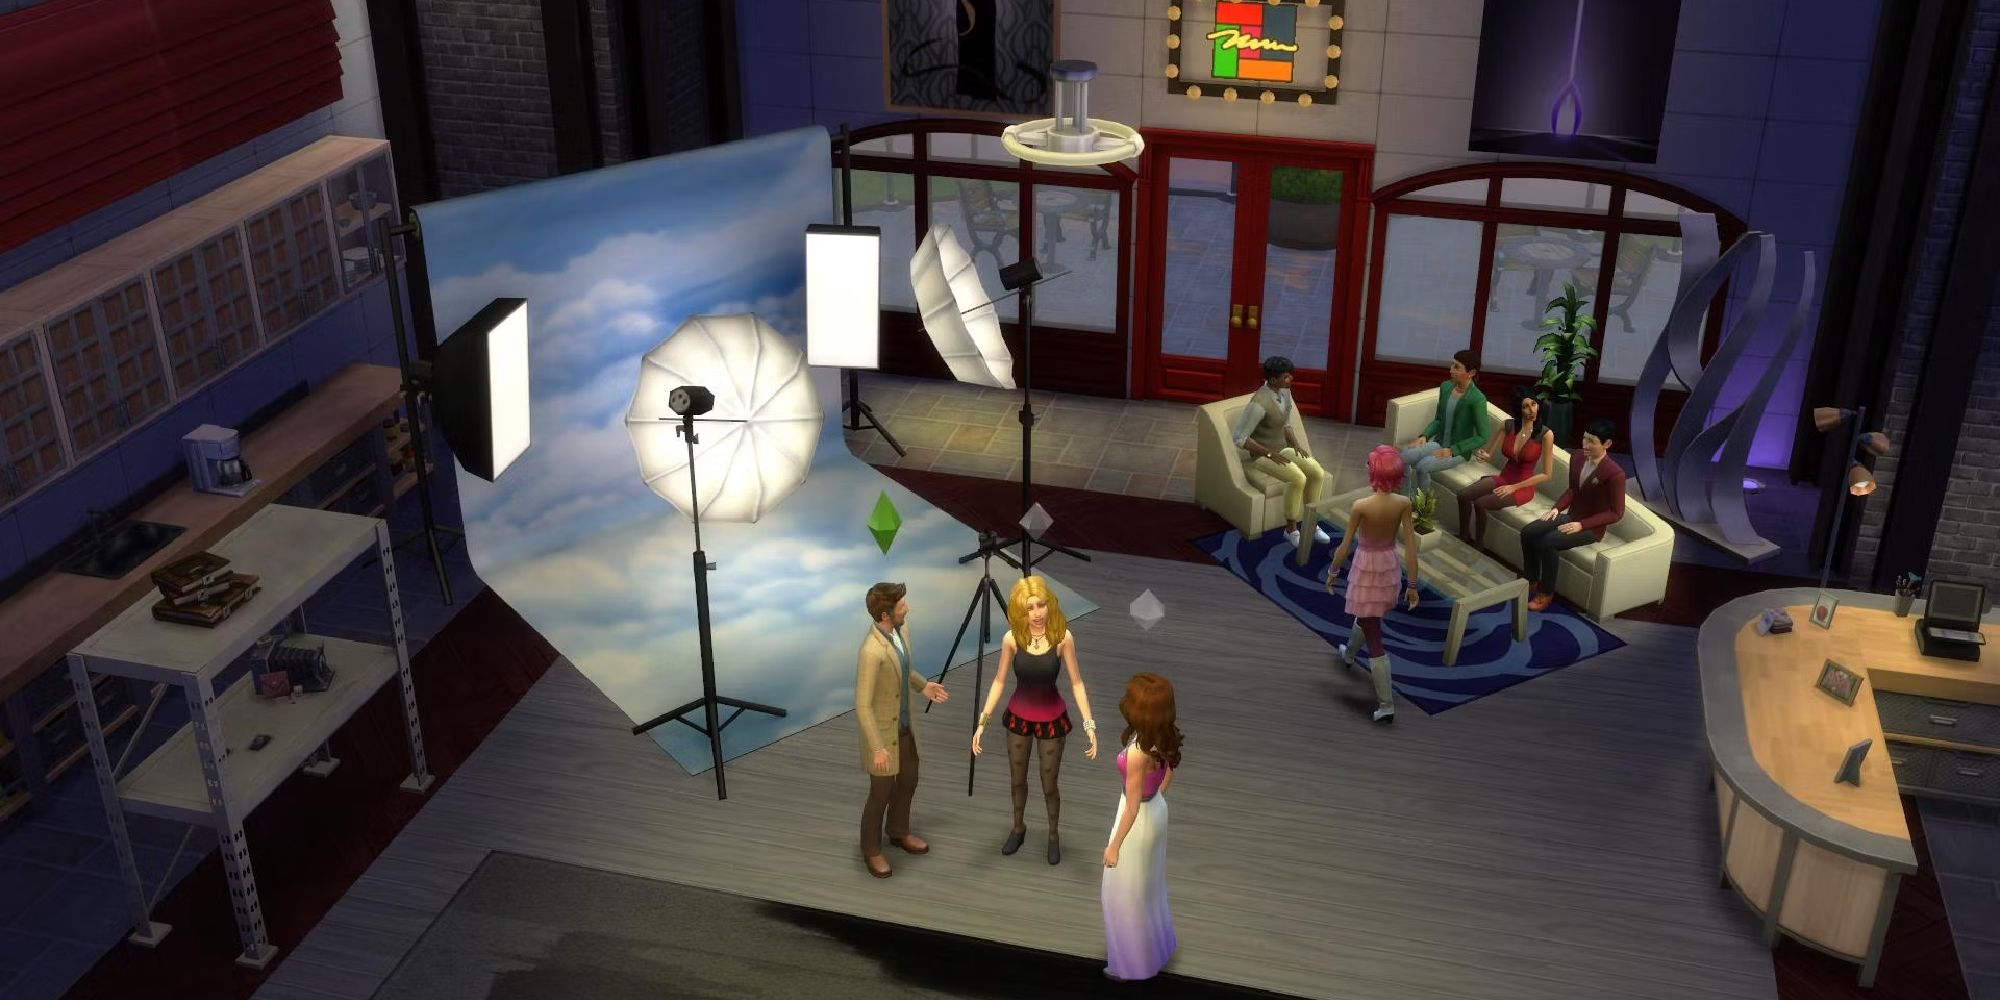 Sims 4 photo studio showing the Sims inside talking.